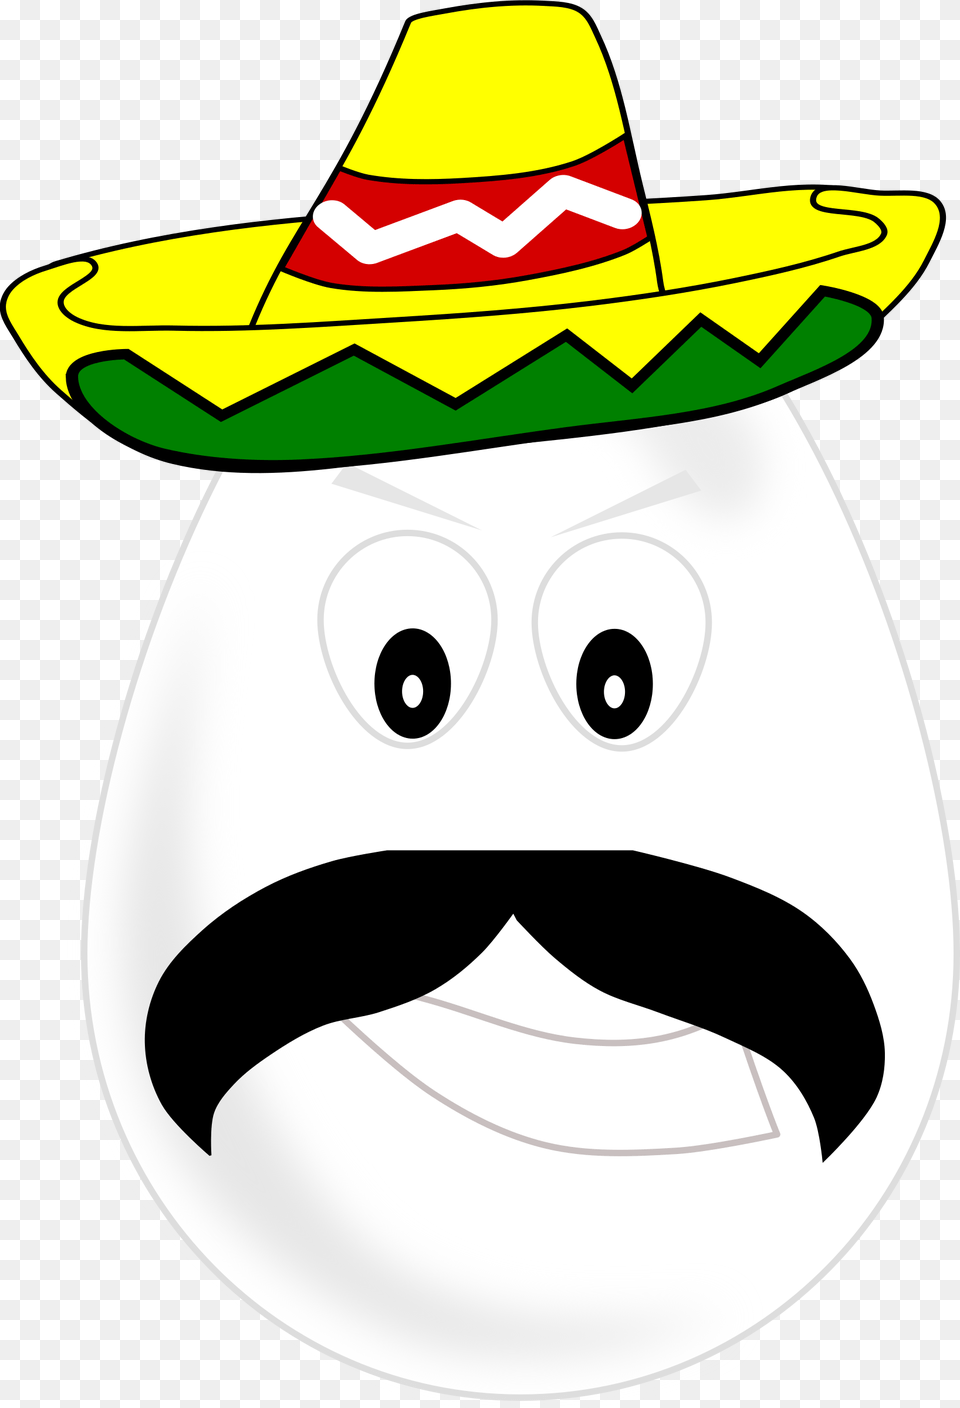 Mexicans Digging Under The Wall, Clothing, Hat, Sombrero Png Image